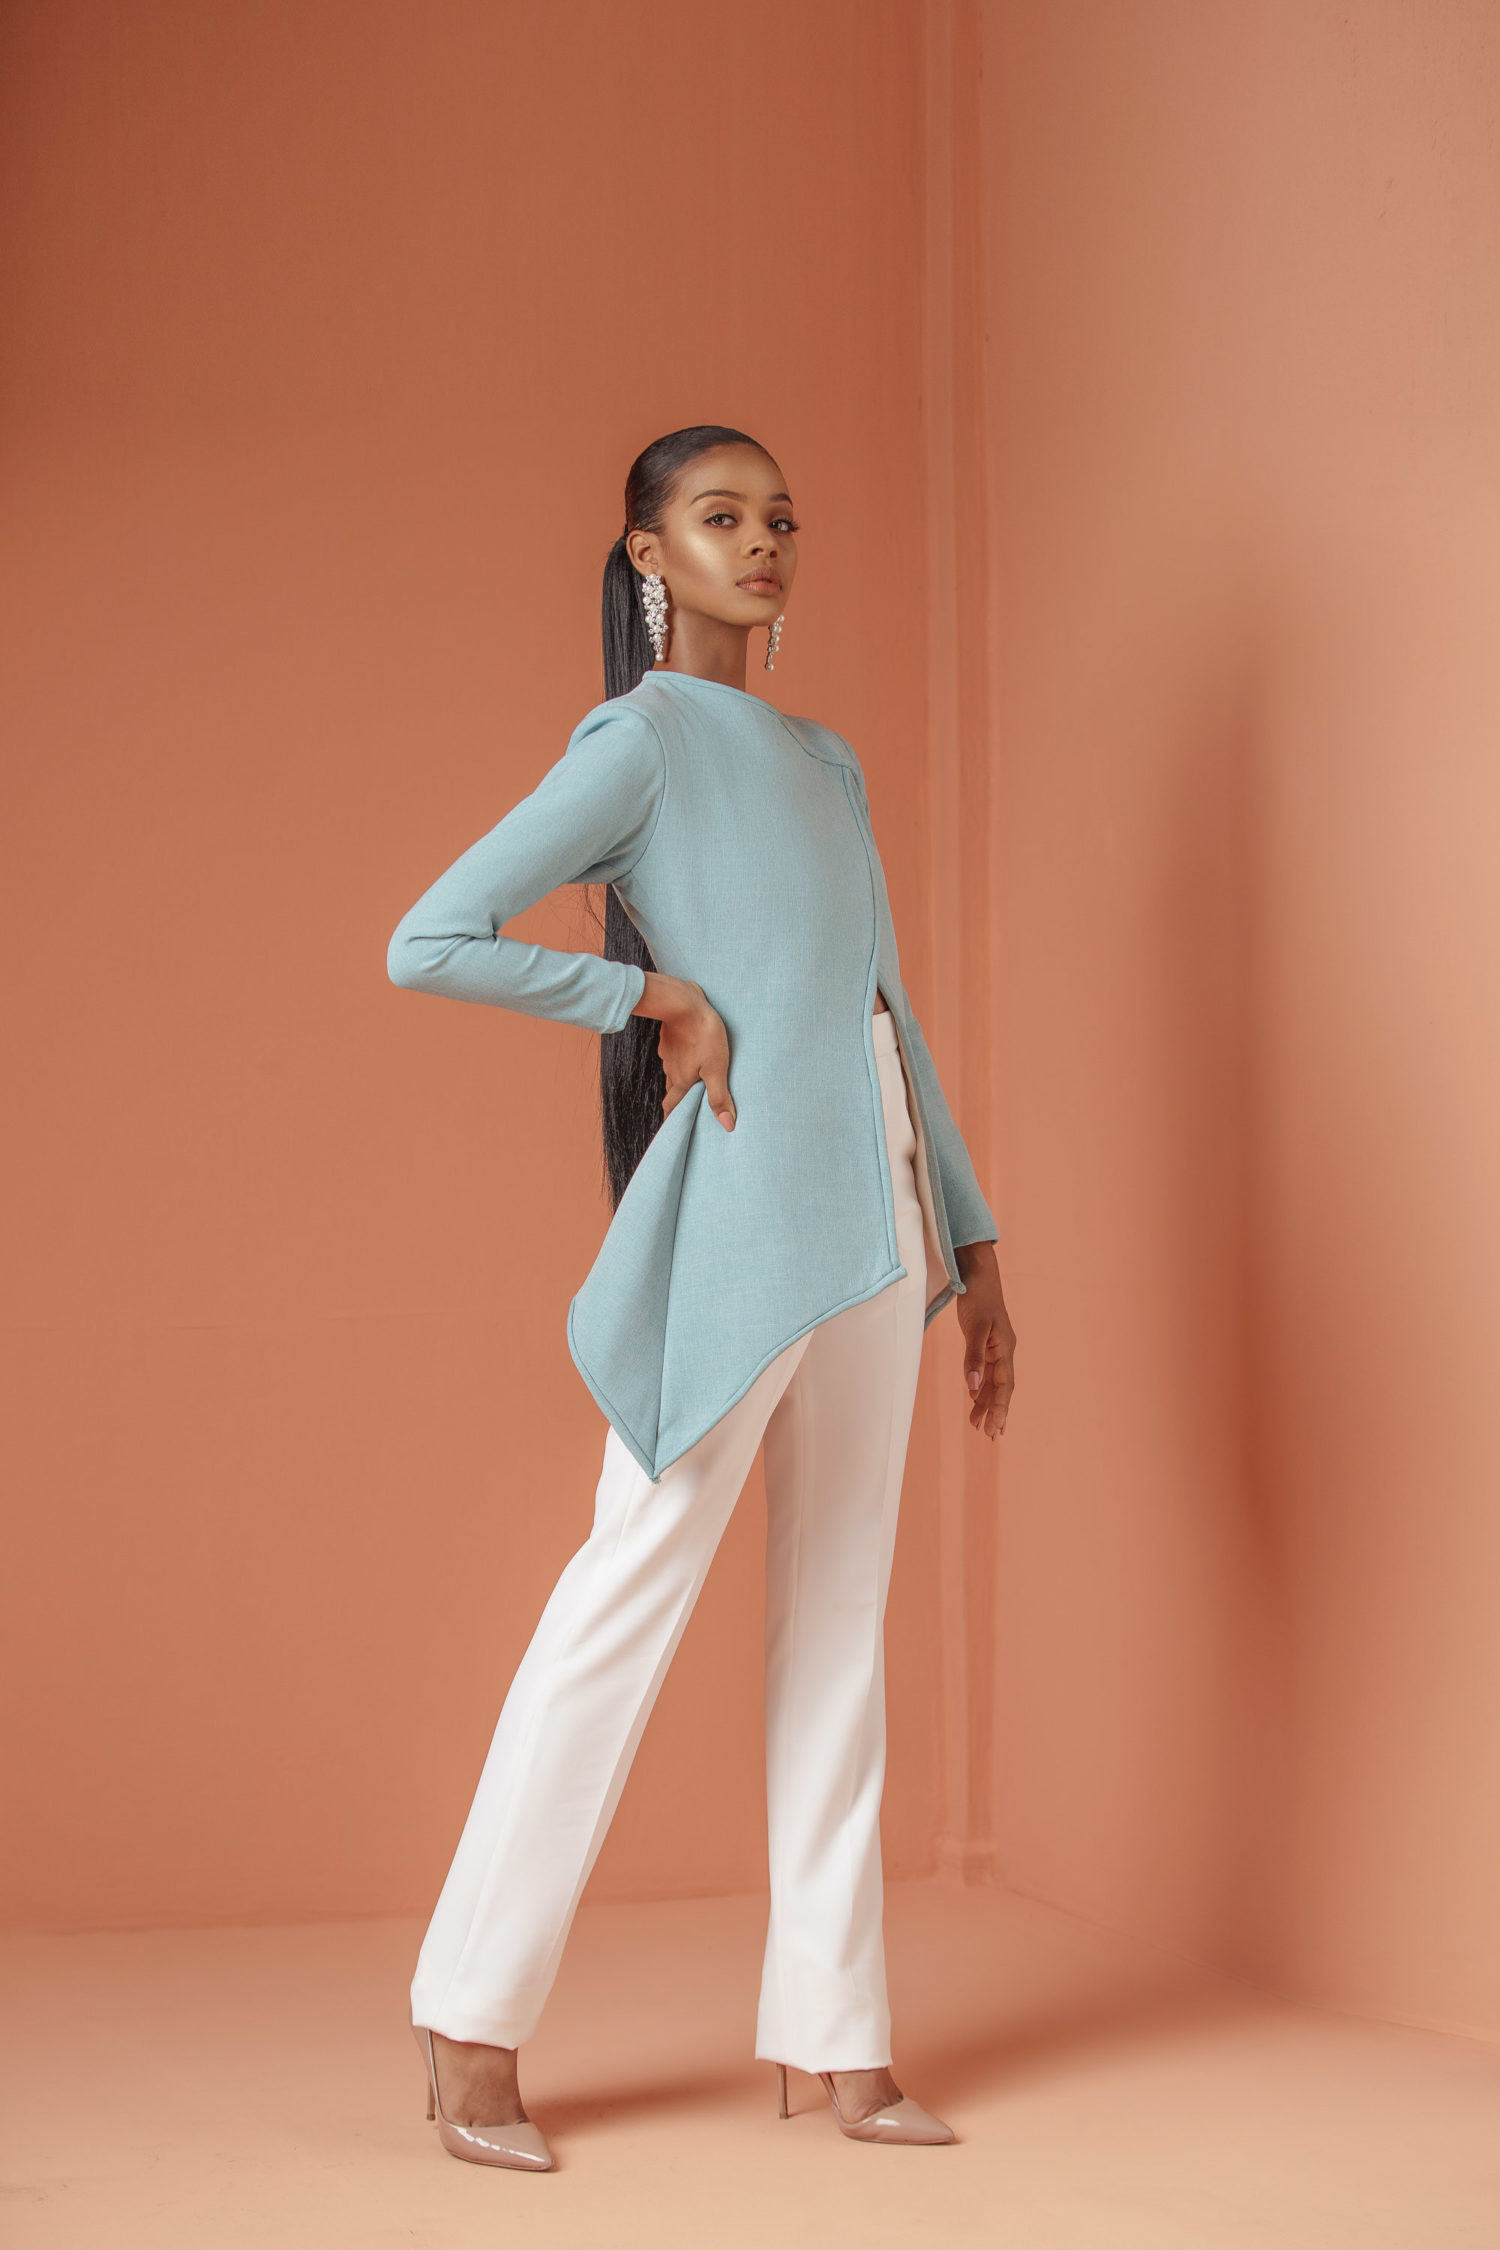 Knanfe: The New Uber-Chic Brand You’ll Actually Love